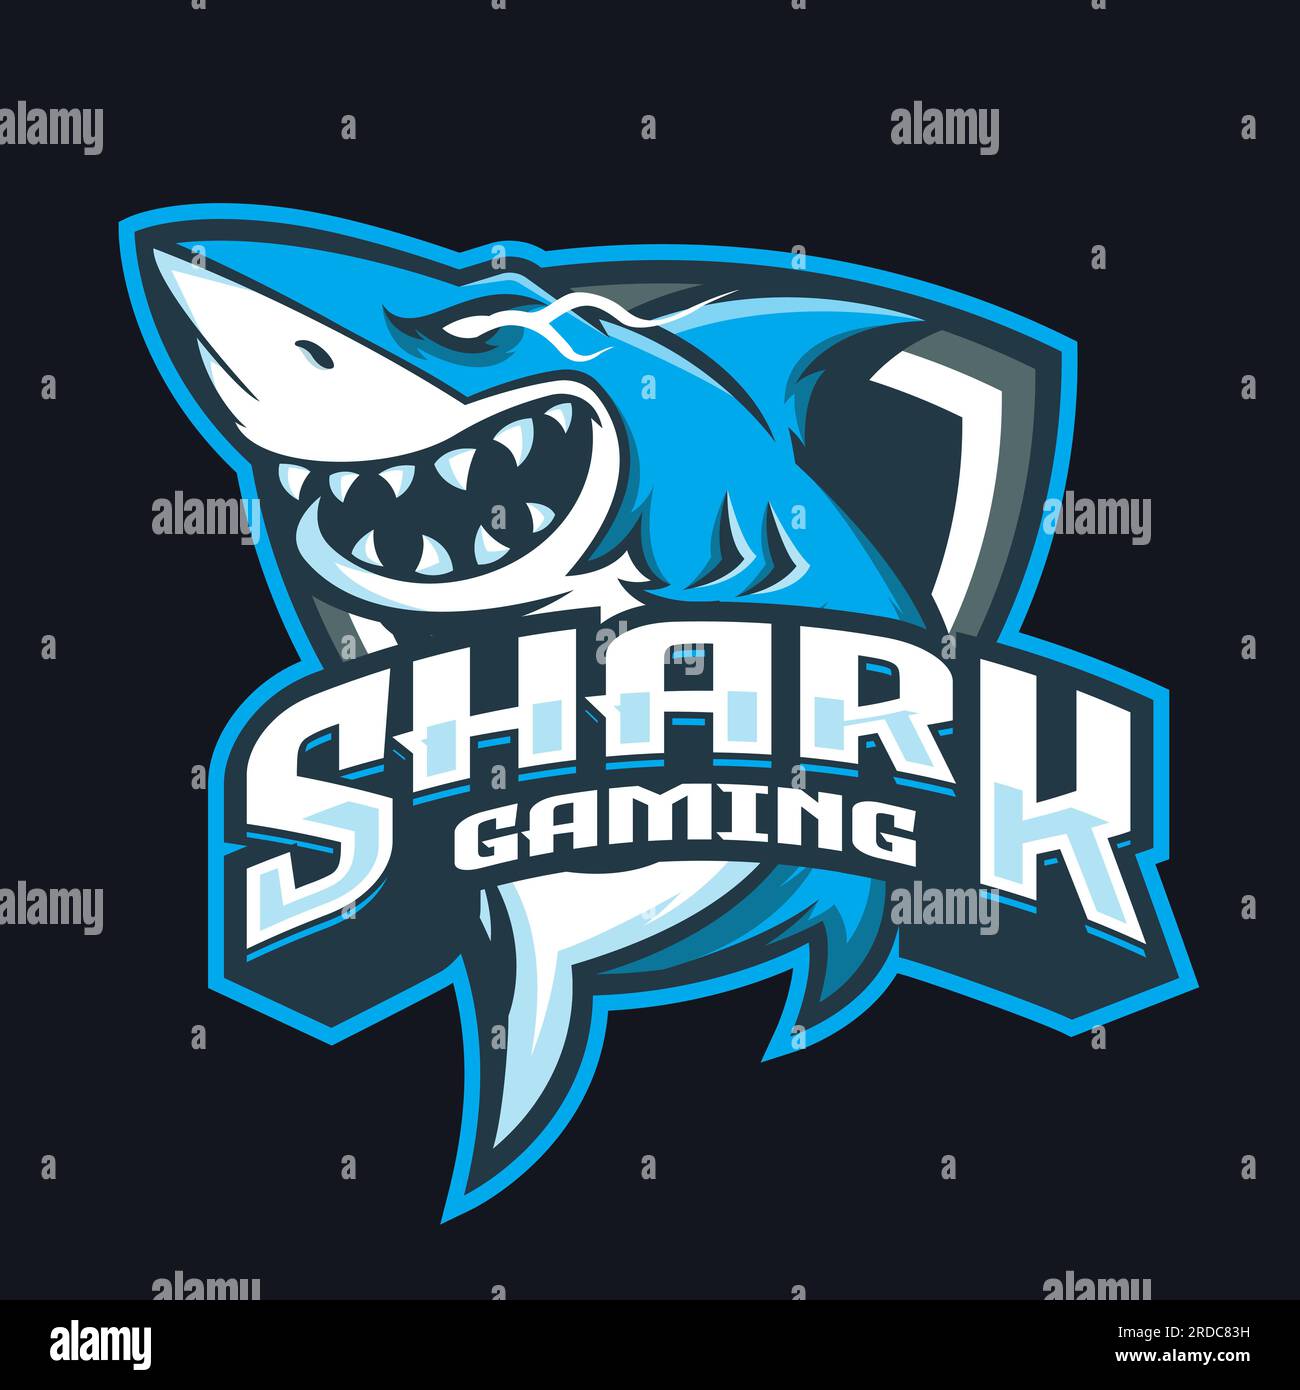 San Jose Sharks Vector Logo Isolated on Teel Background with